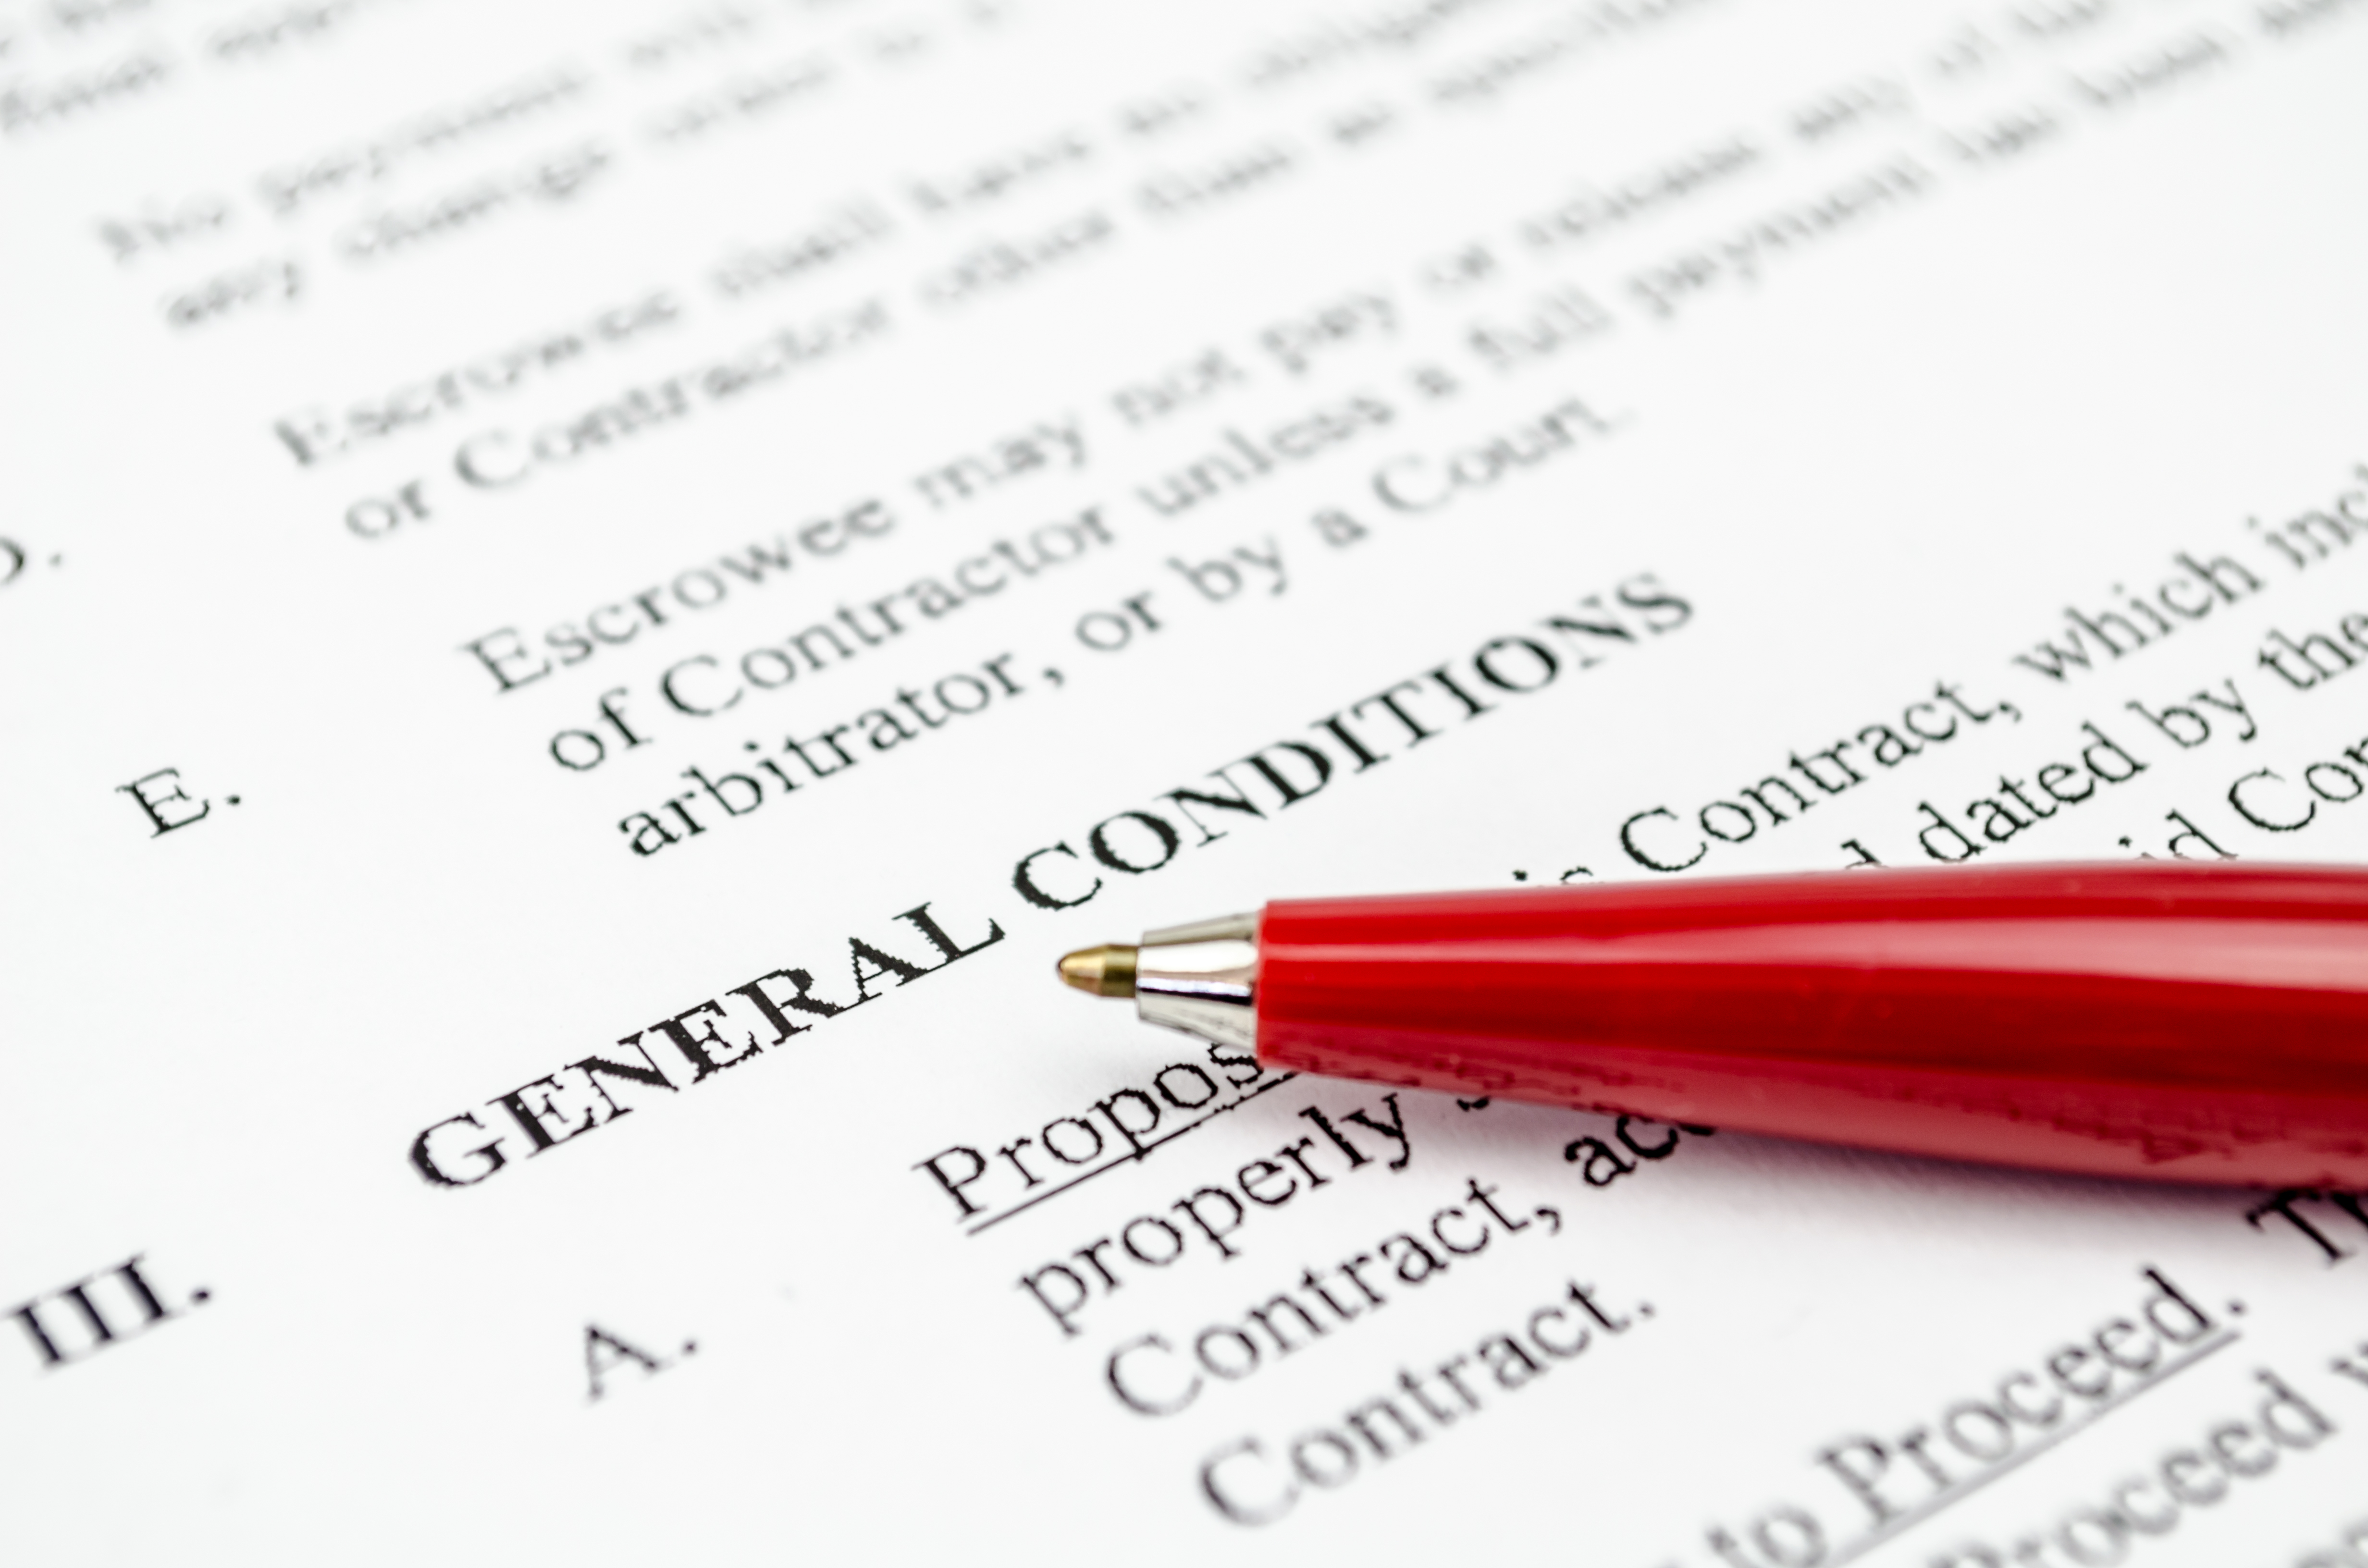 General Terms and Conditions of Carriage